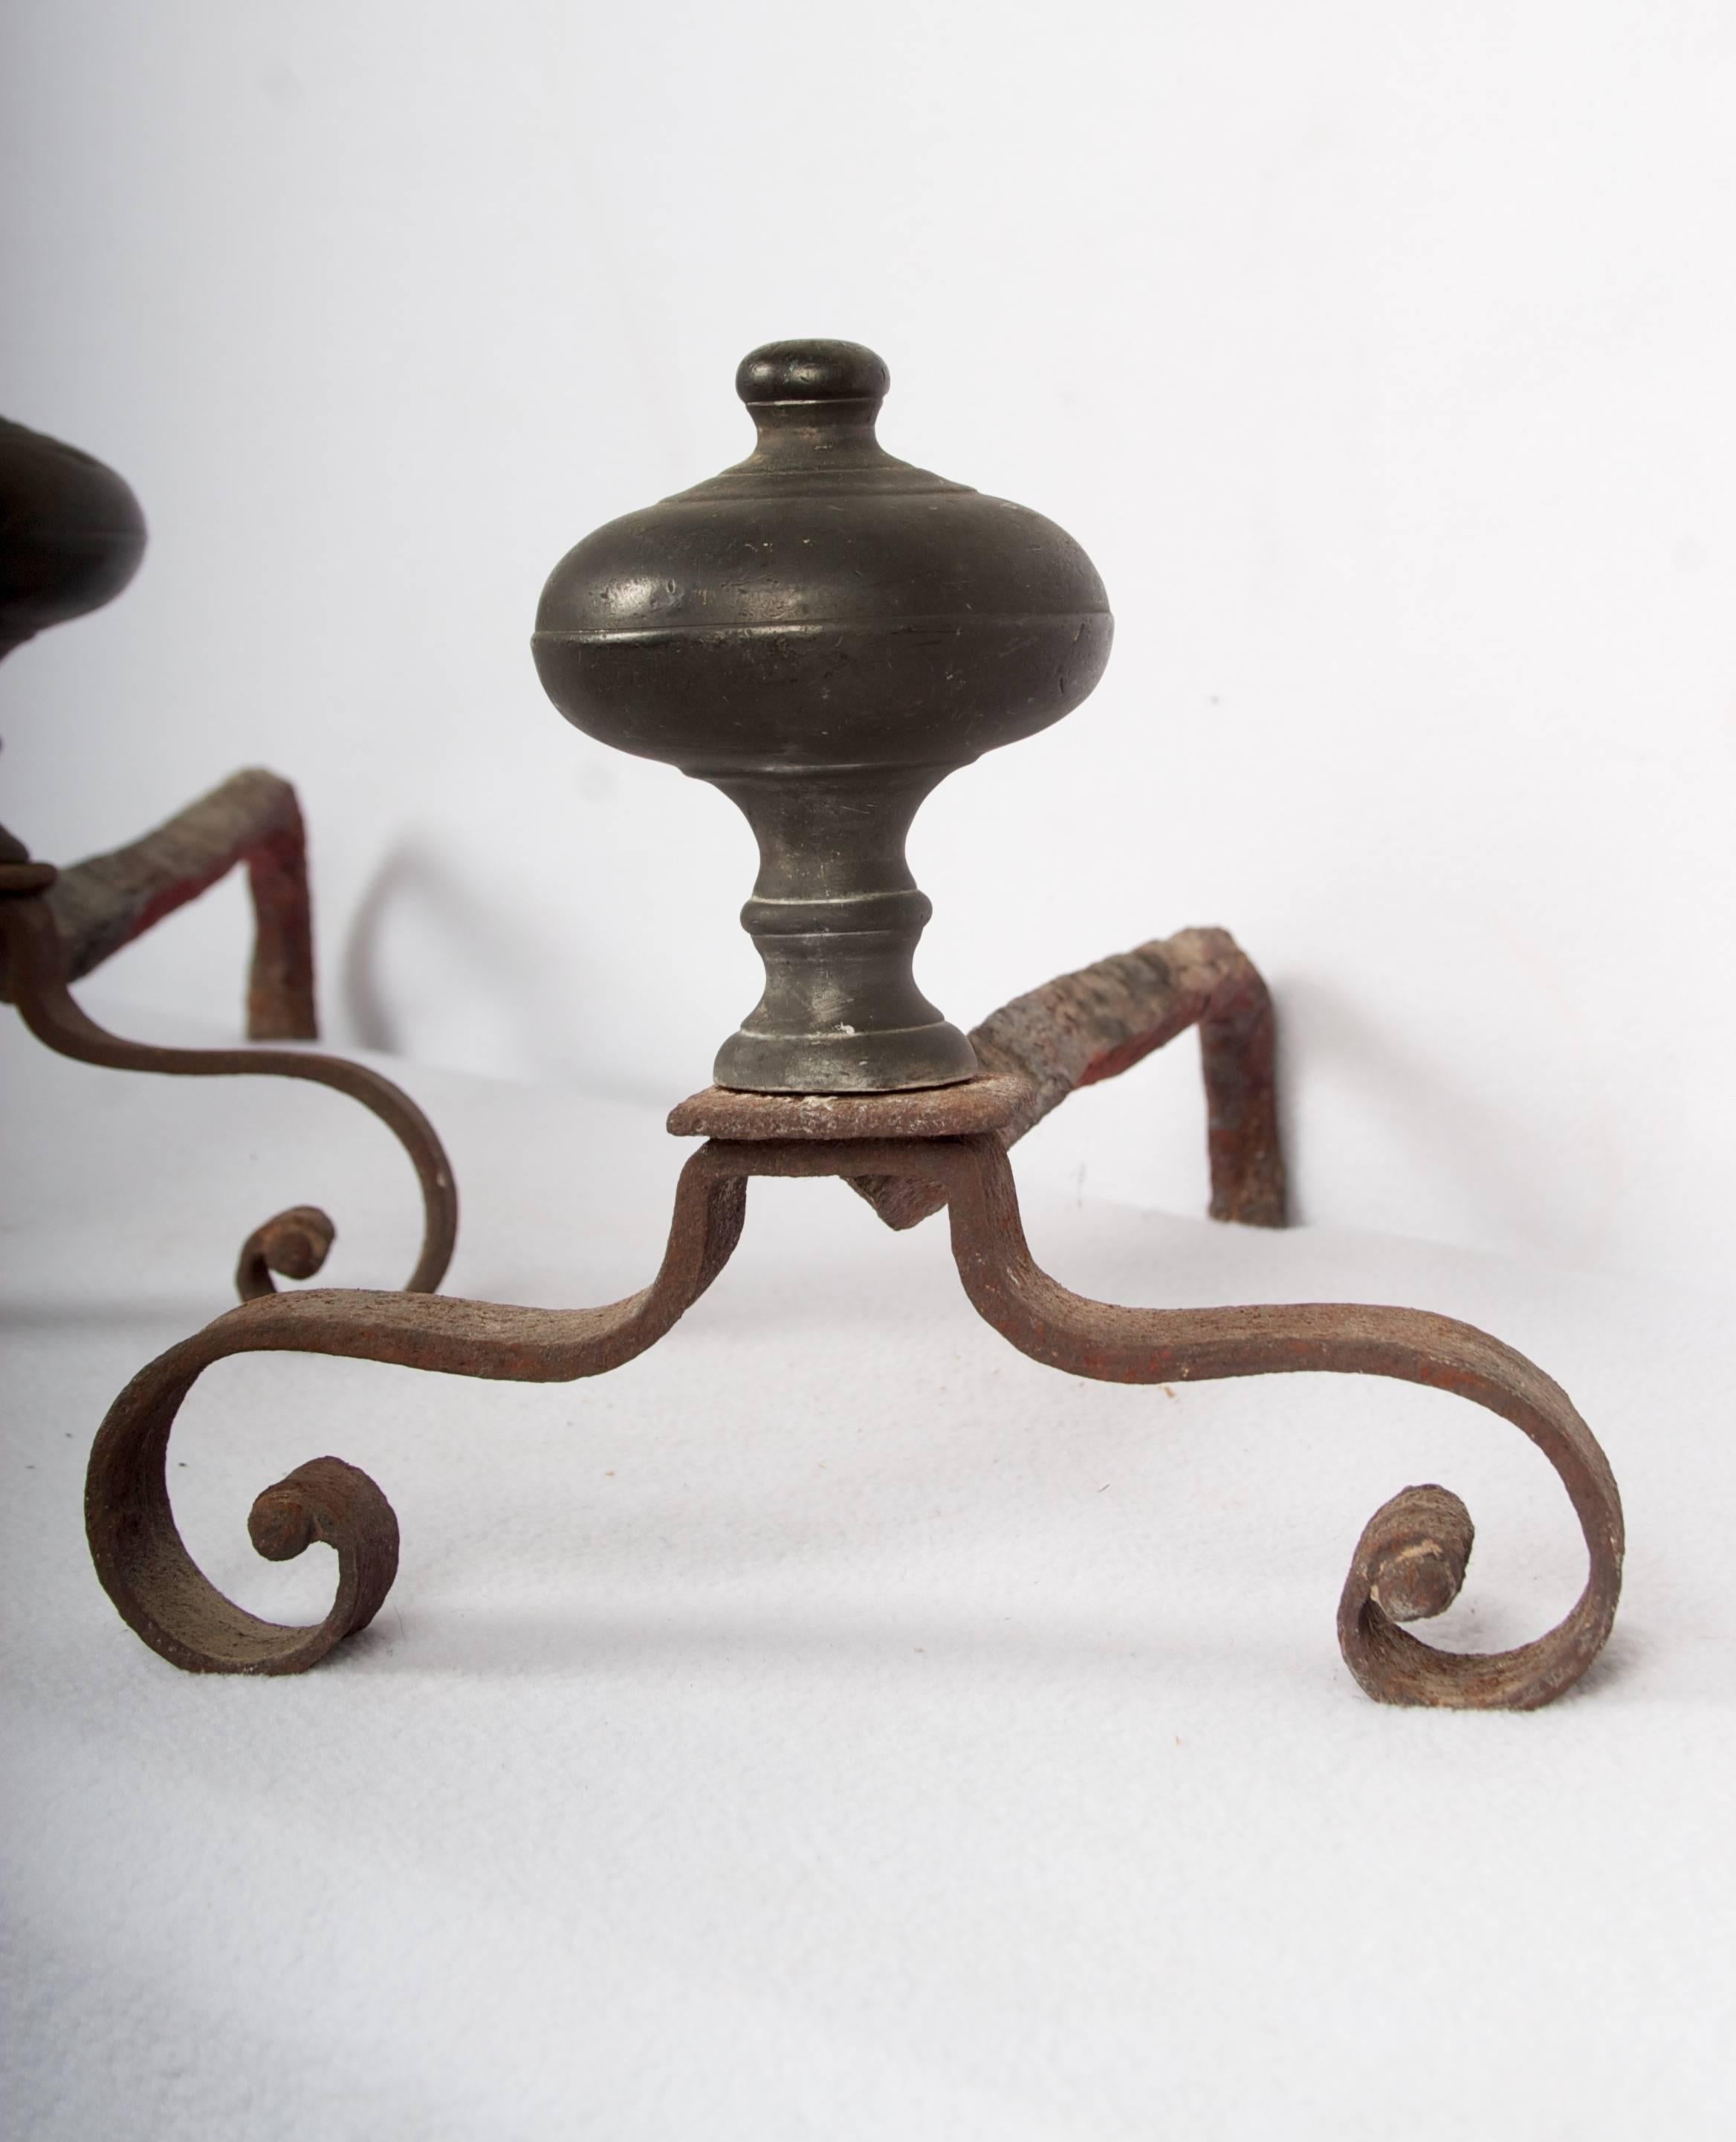 French Provincial Early 19th Century Hand-Forged Andirons with Lovely Patinated Turned Finial